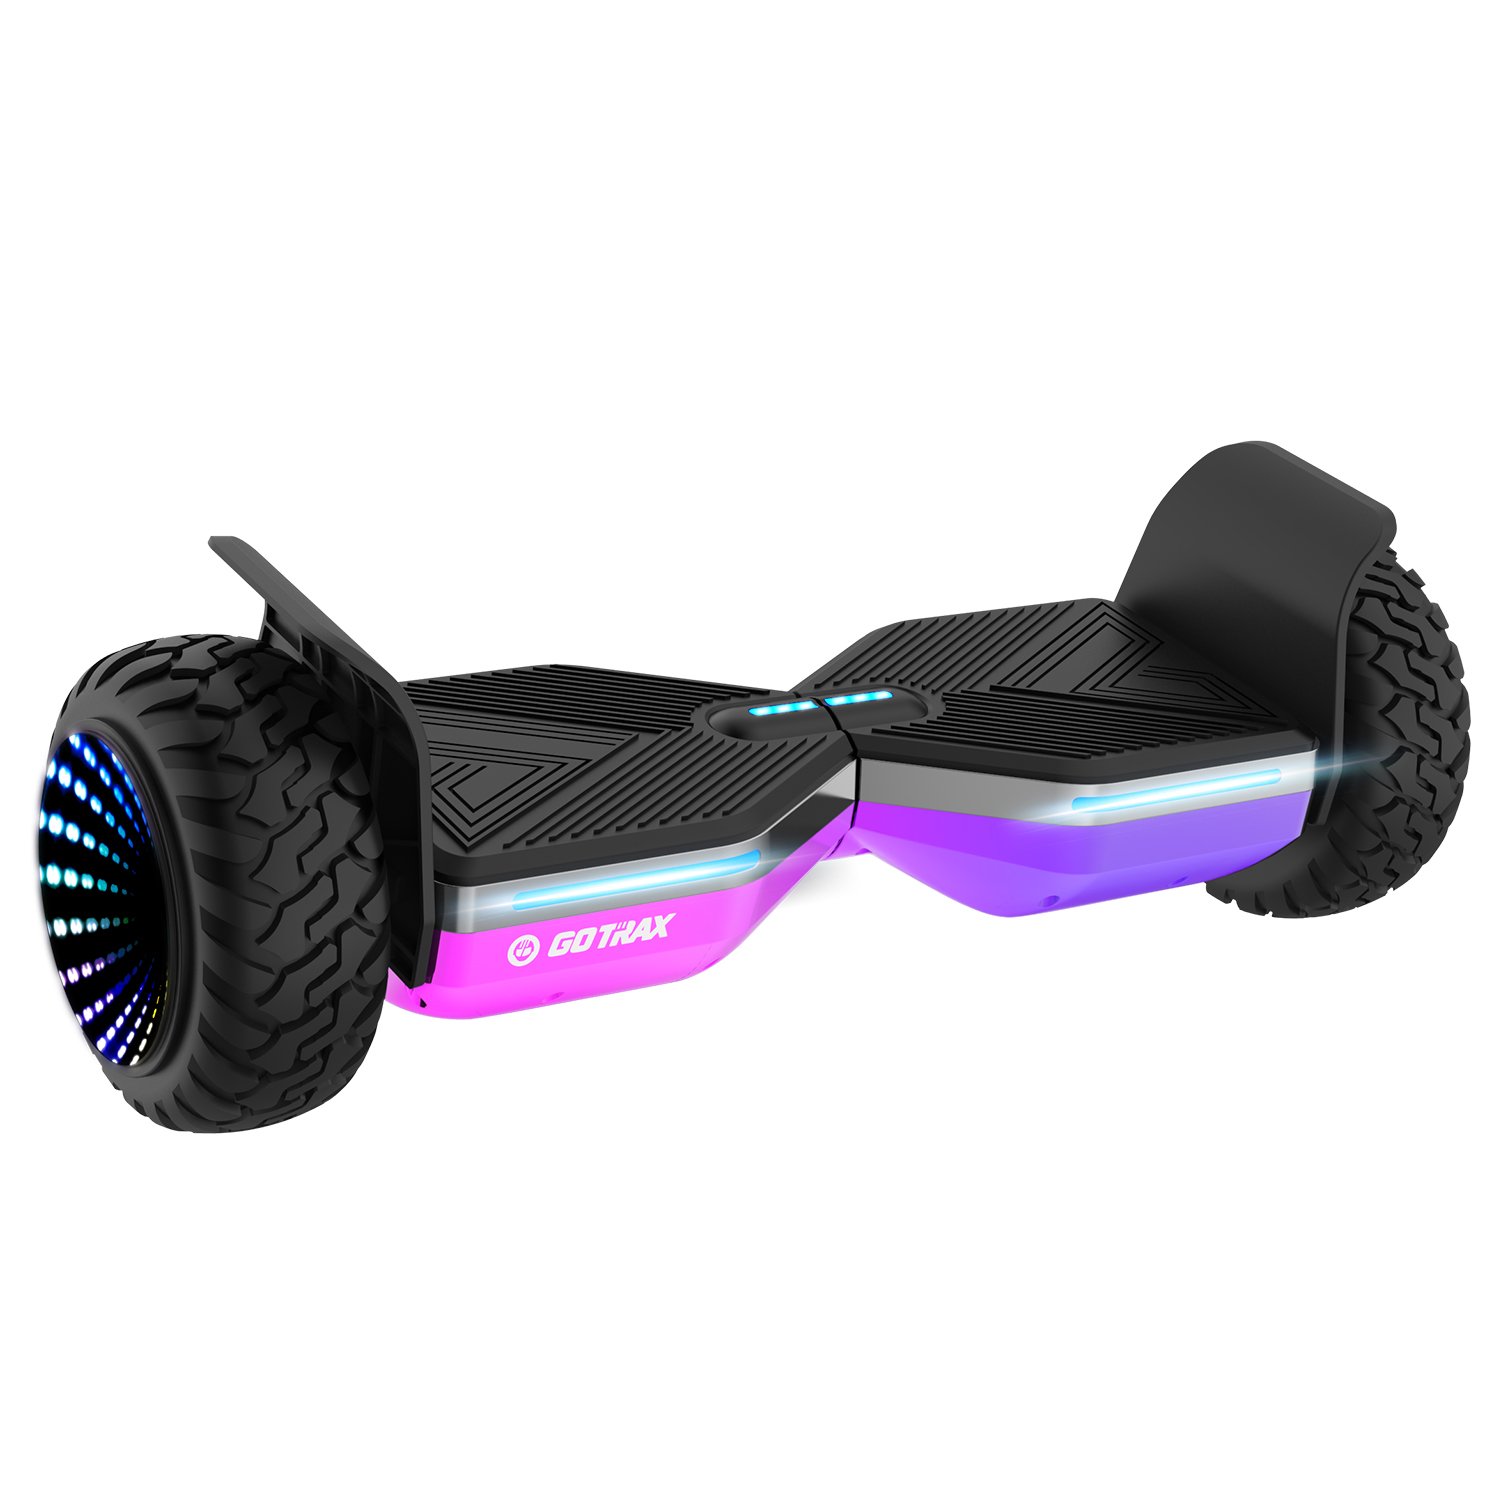 Gotrax Infinity Pro LED Off Road Electric Hoverboard